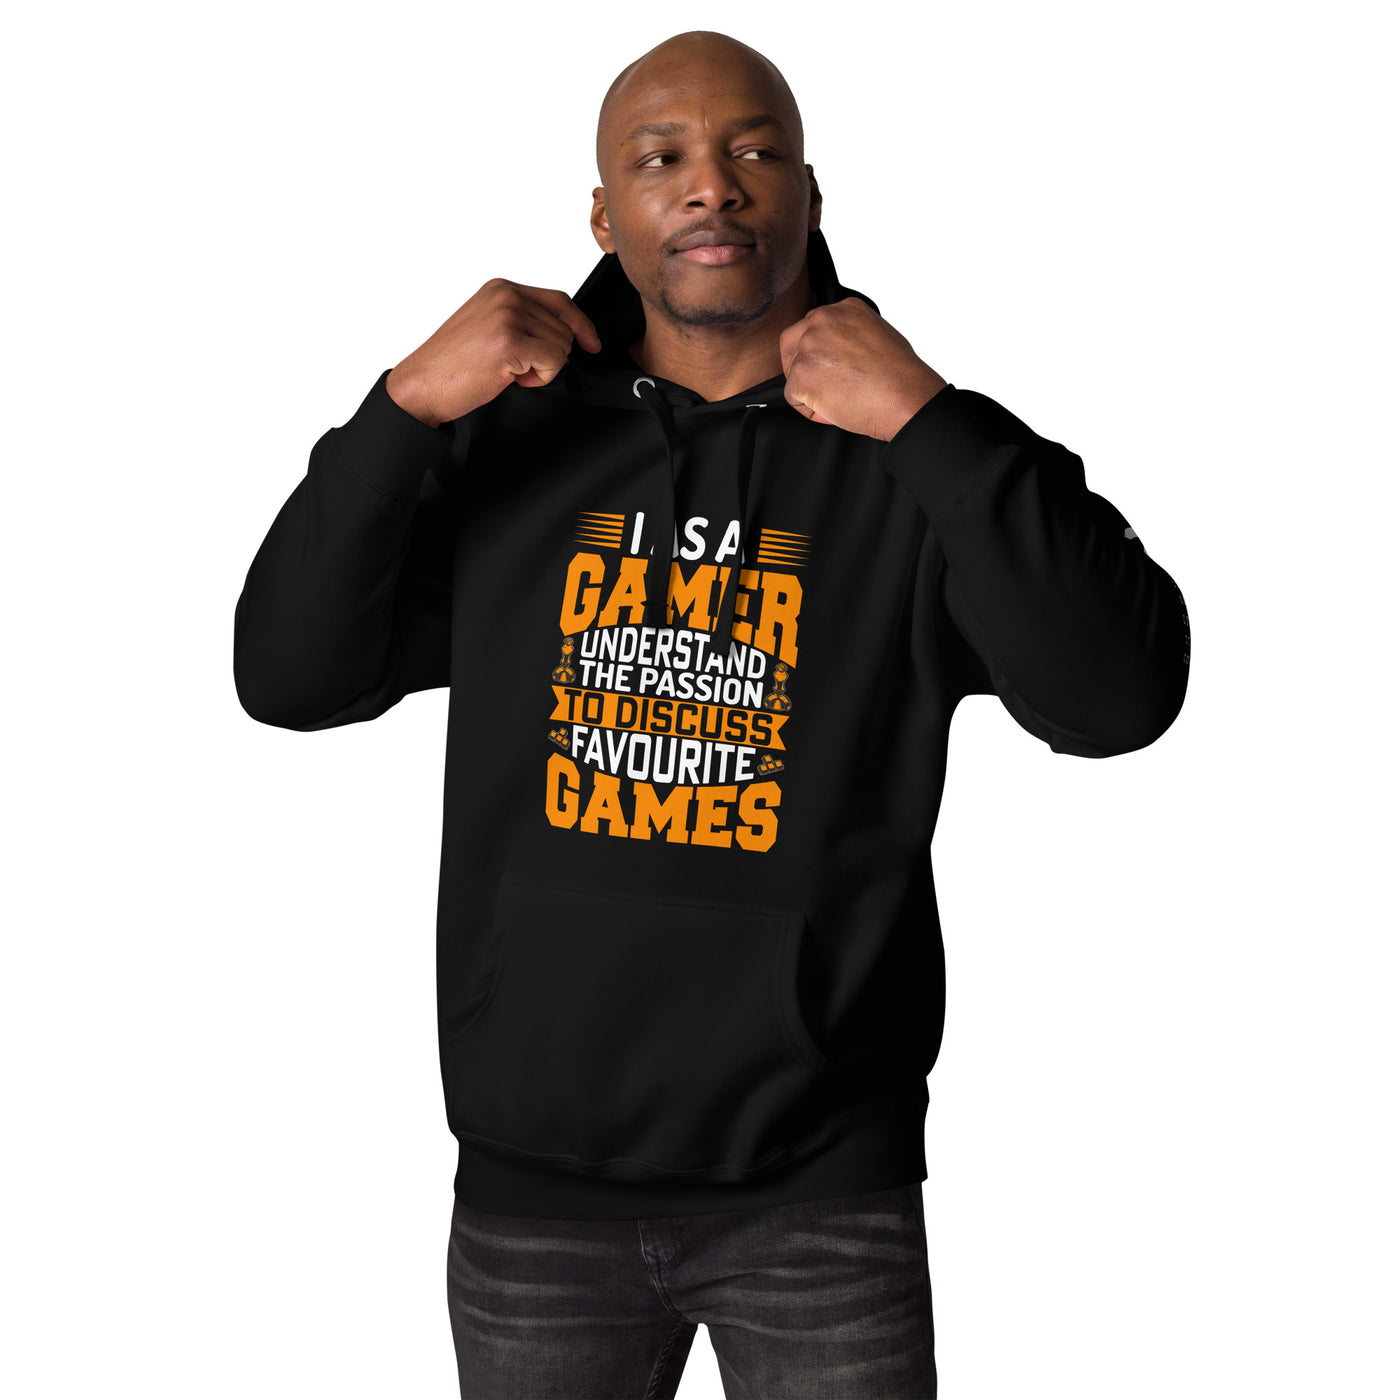 I, as a Gamer, Understand the Passion to Discuss Favorite Games - Unisex Hoodie